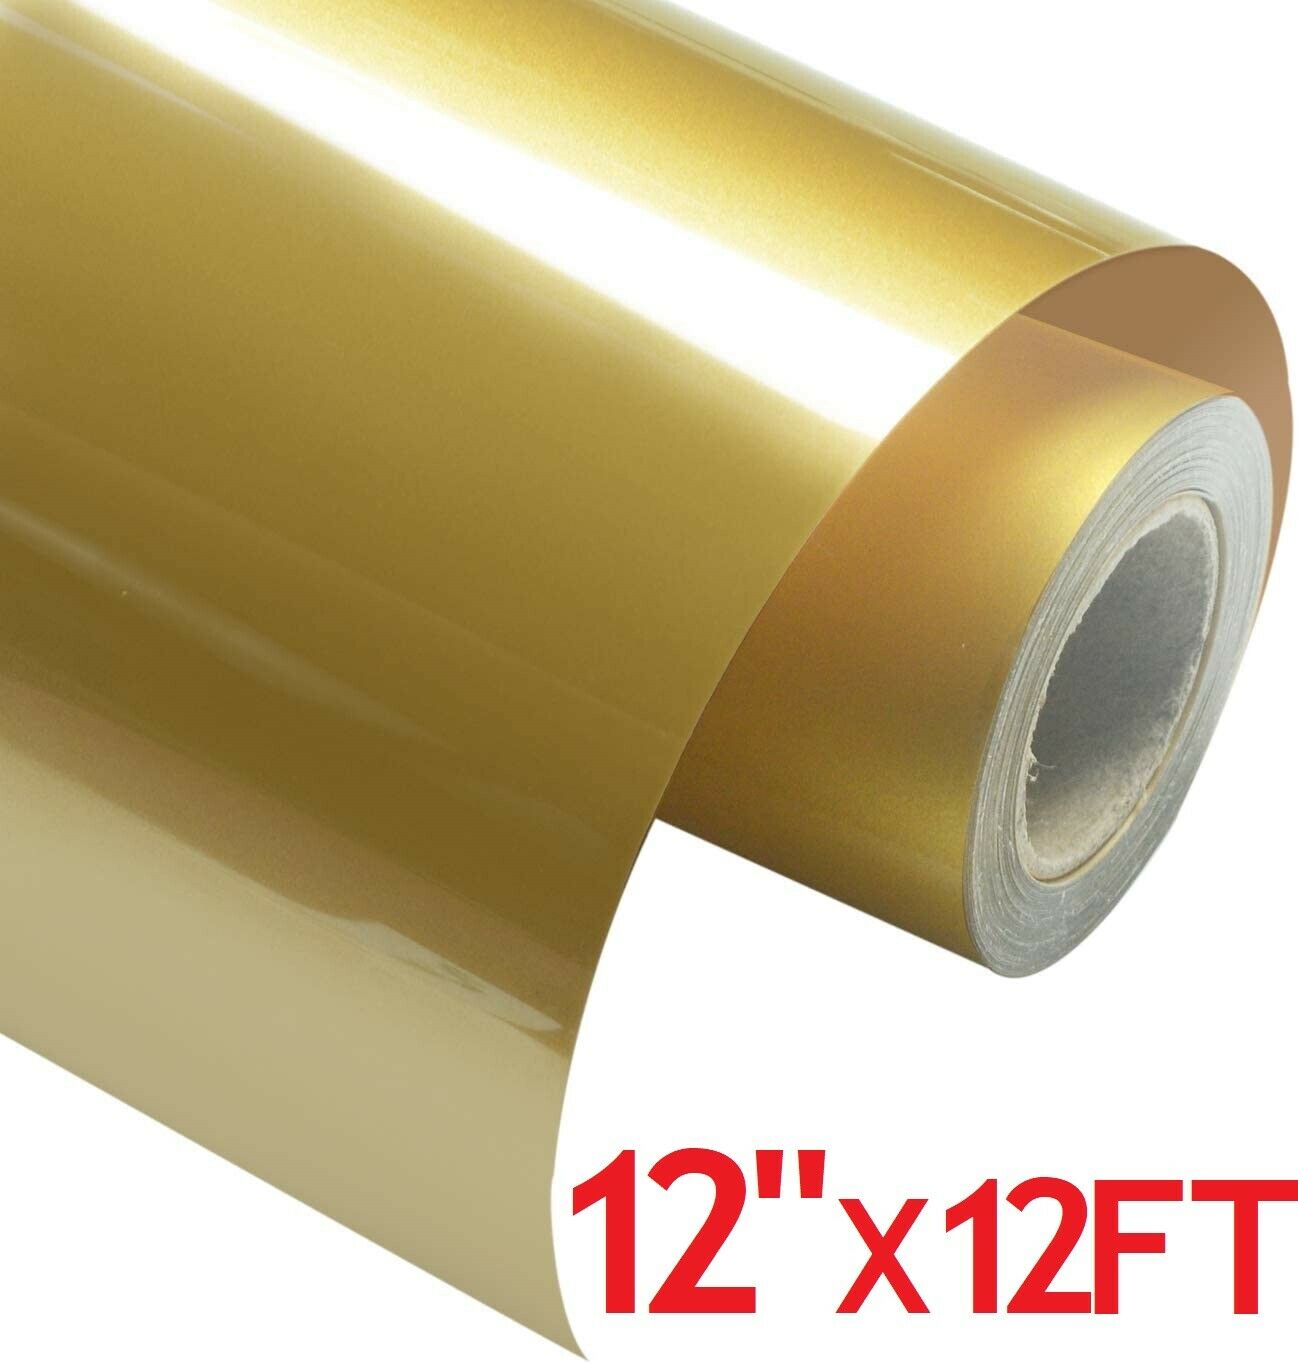 12 x 12FT Gold HTV Iron On Heat Transfer Vinyl Roll for T Shirt Shoes Hats  Bags